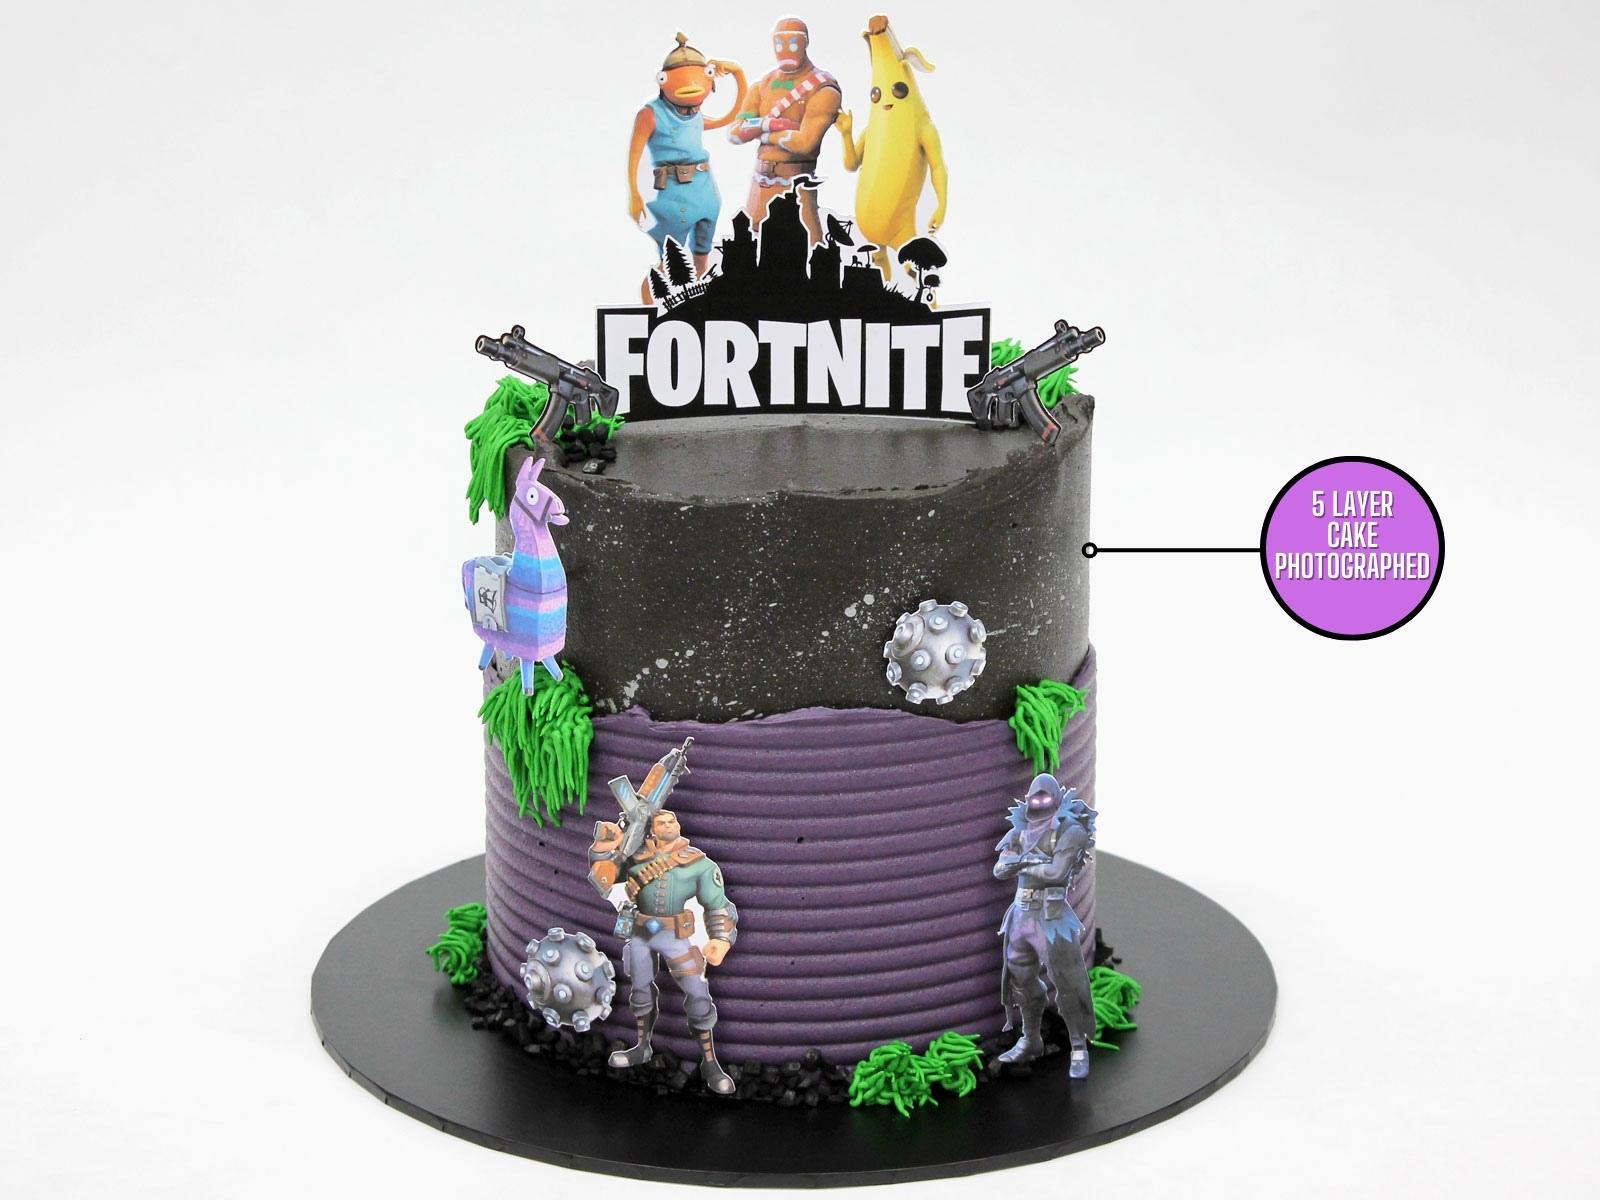 18 Fortnite Cake Ideas for Your Next Party - Mom's Got the Stuff